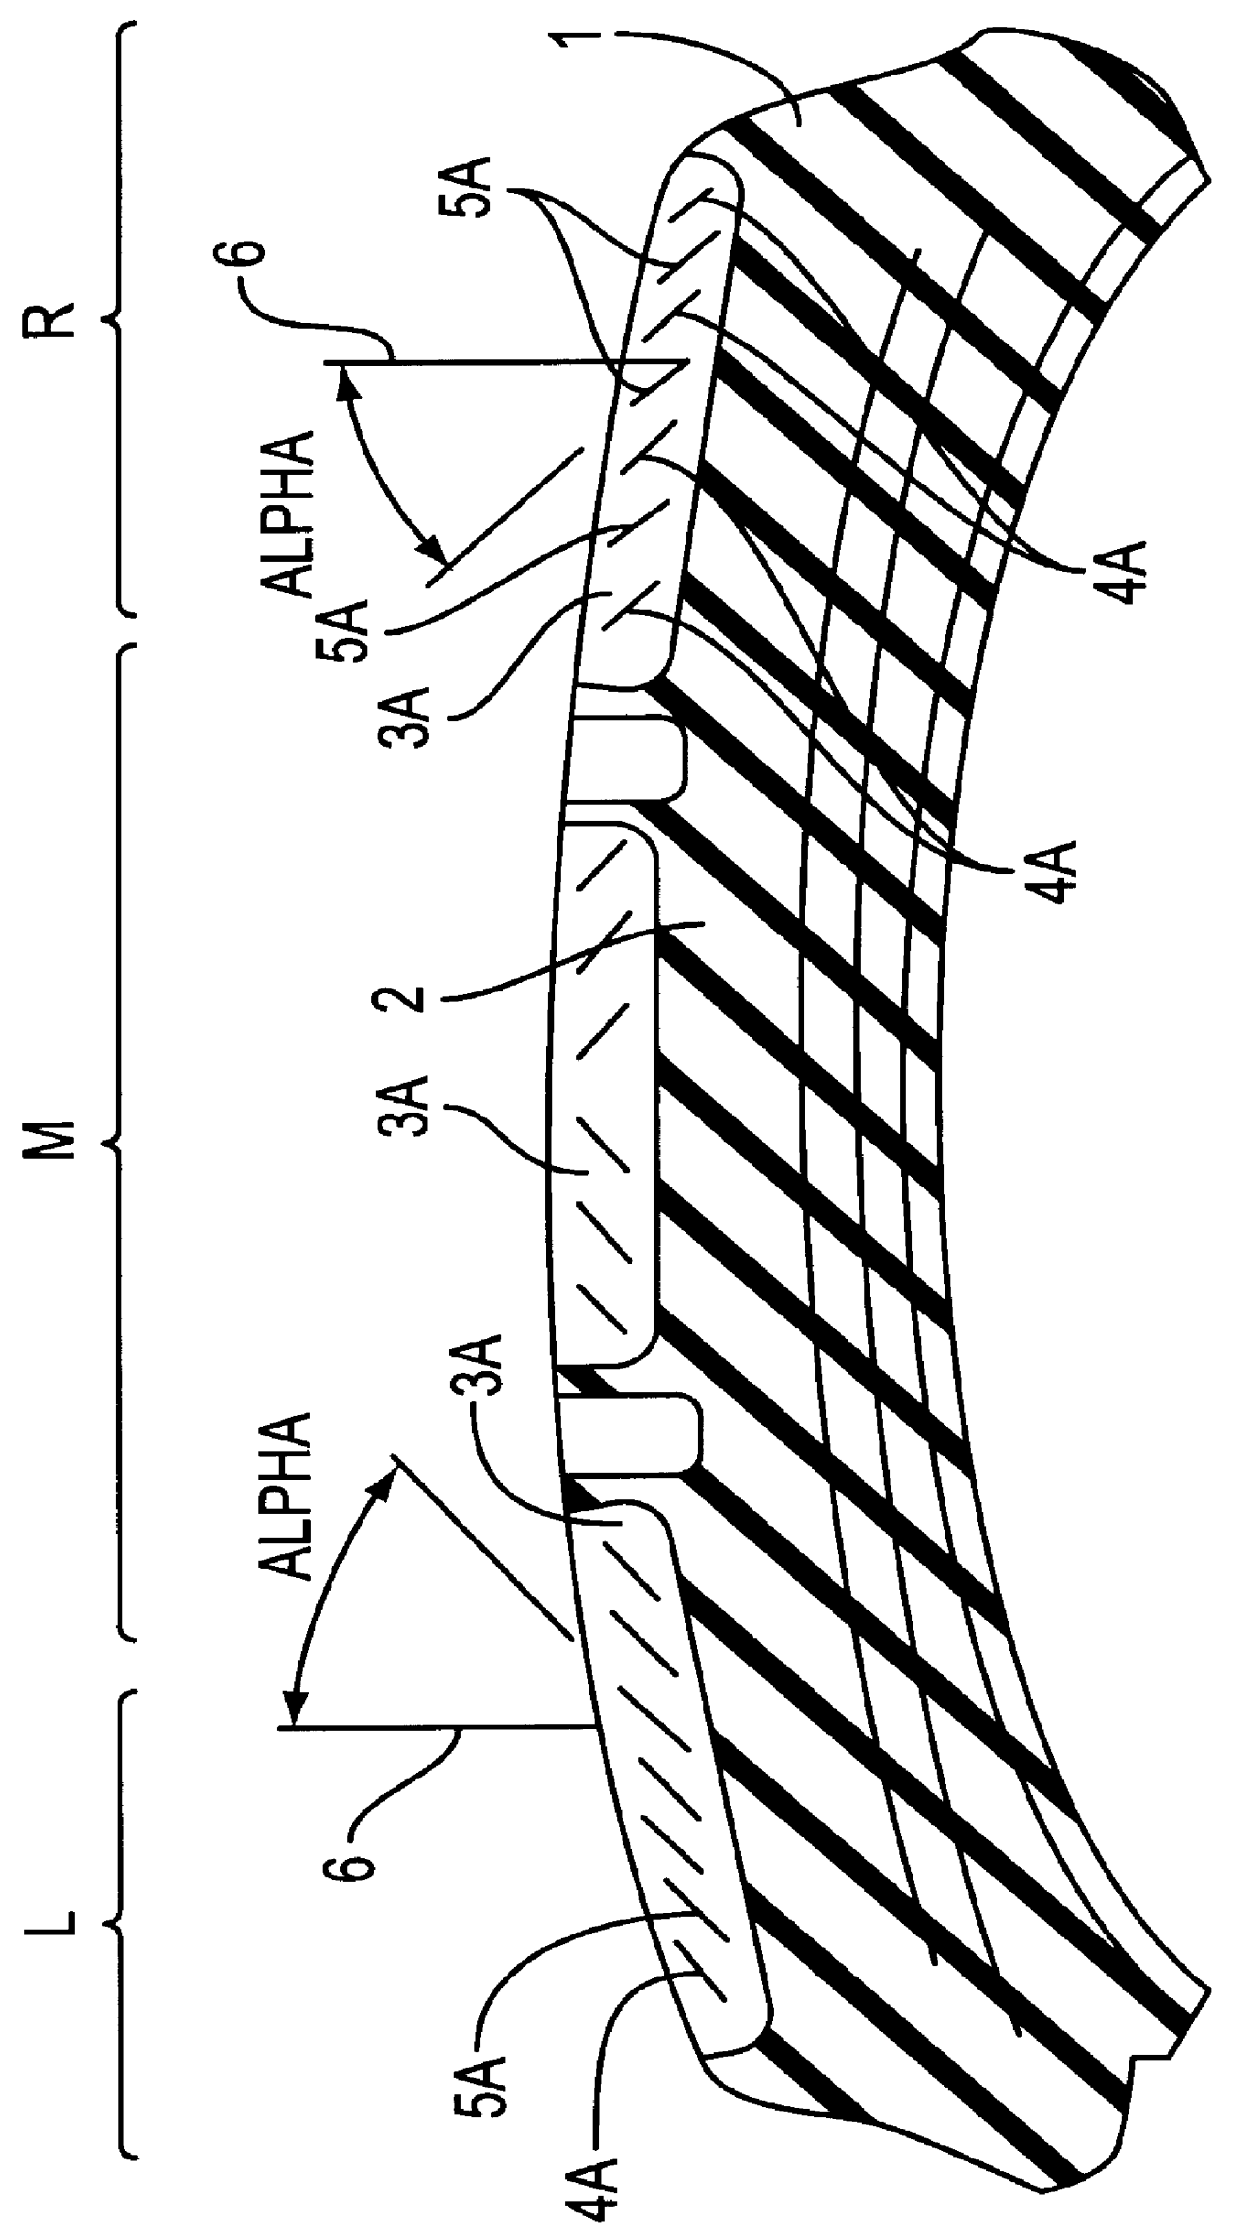 Vehicle tire with a tread exhibiting sipes substantially running in the axial direction